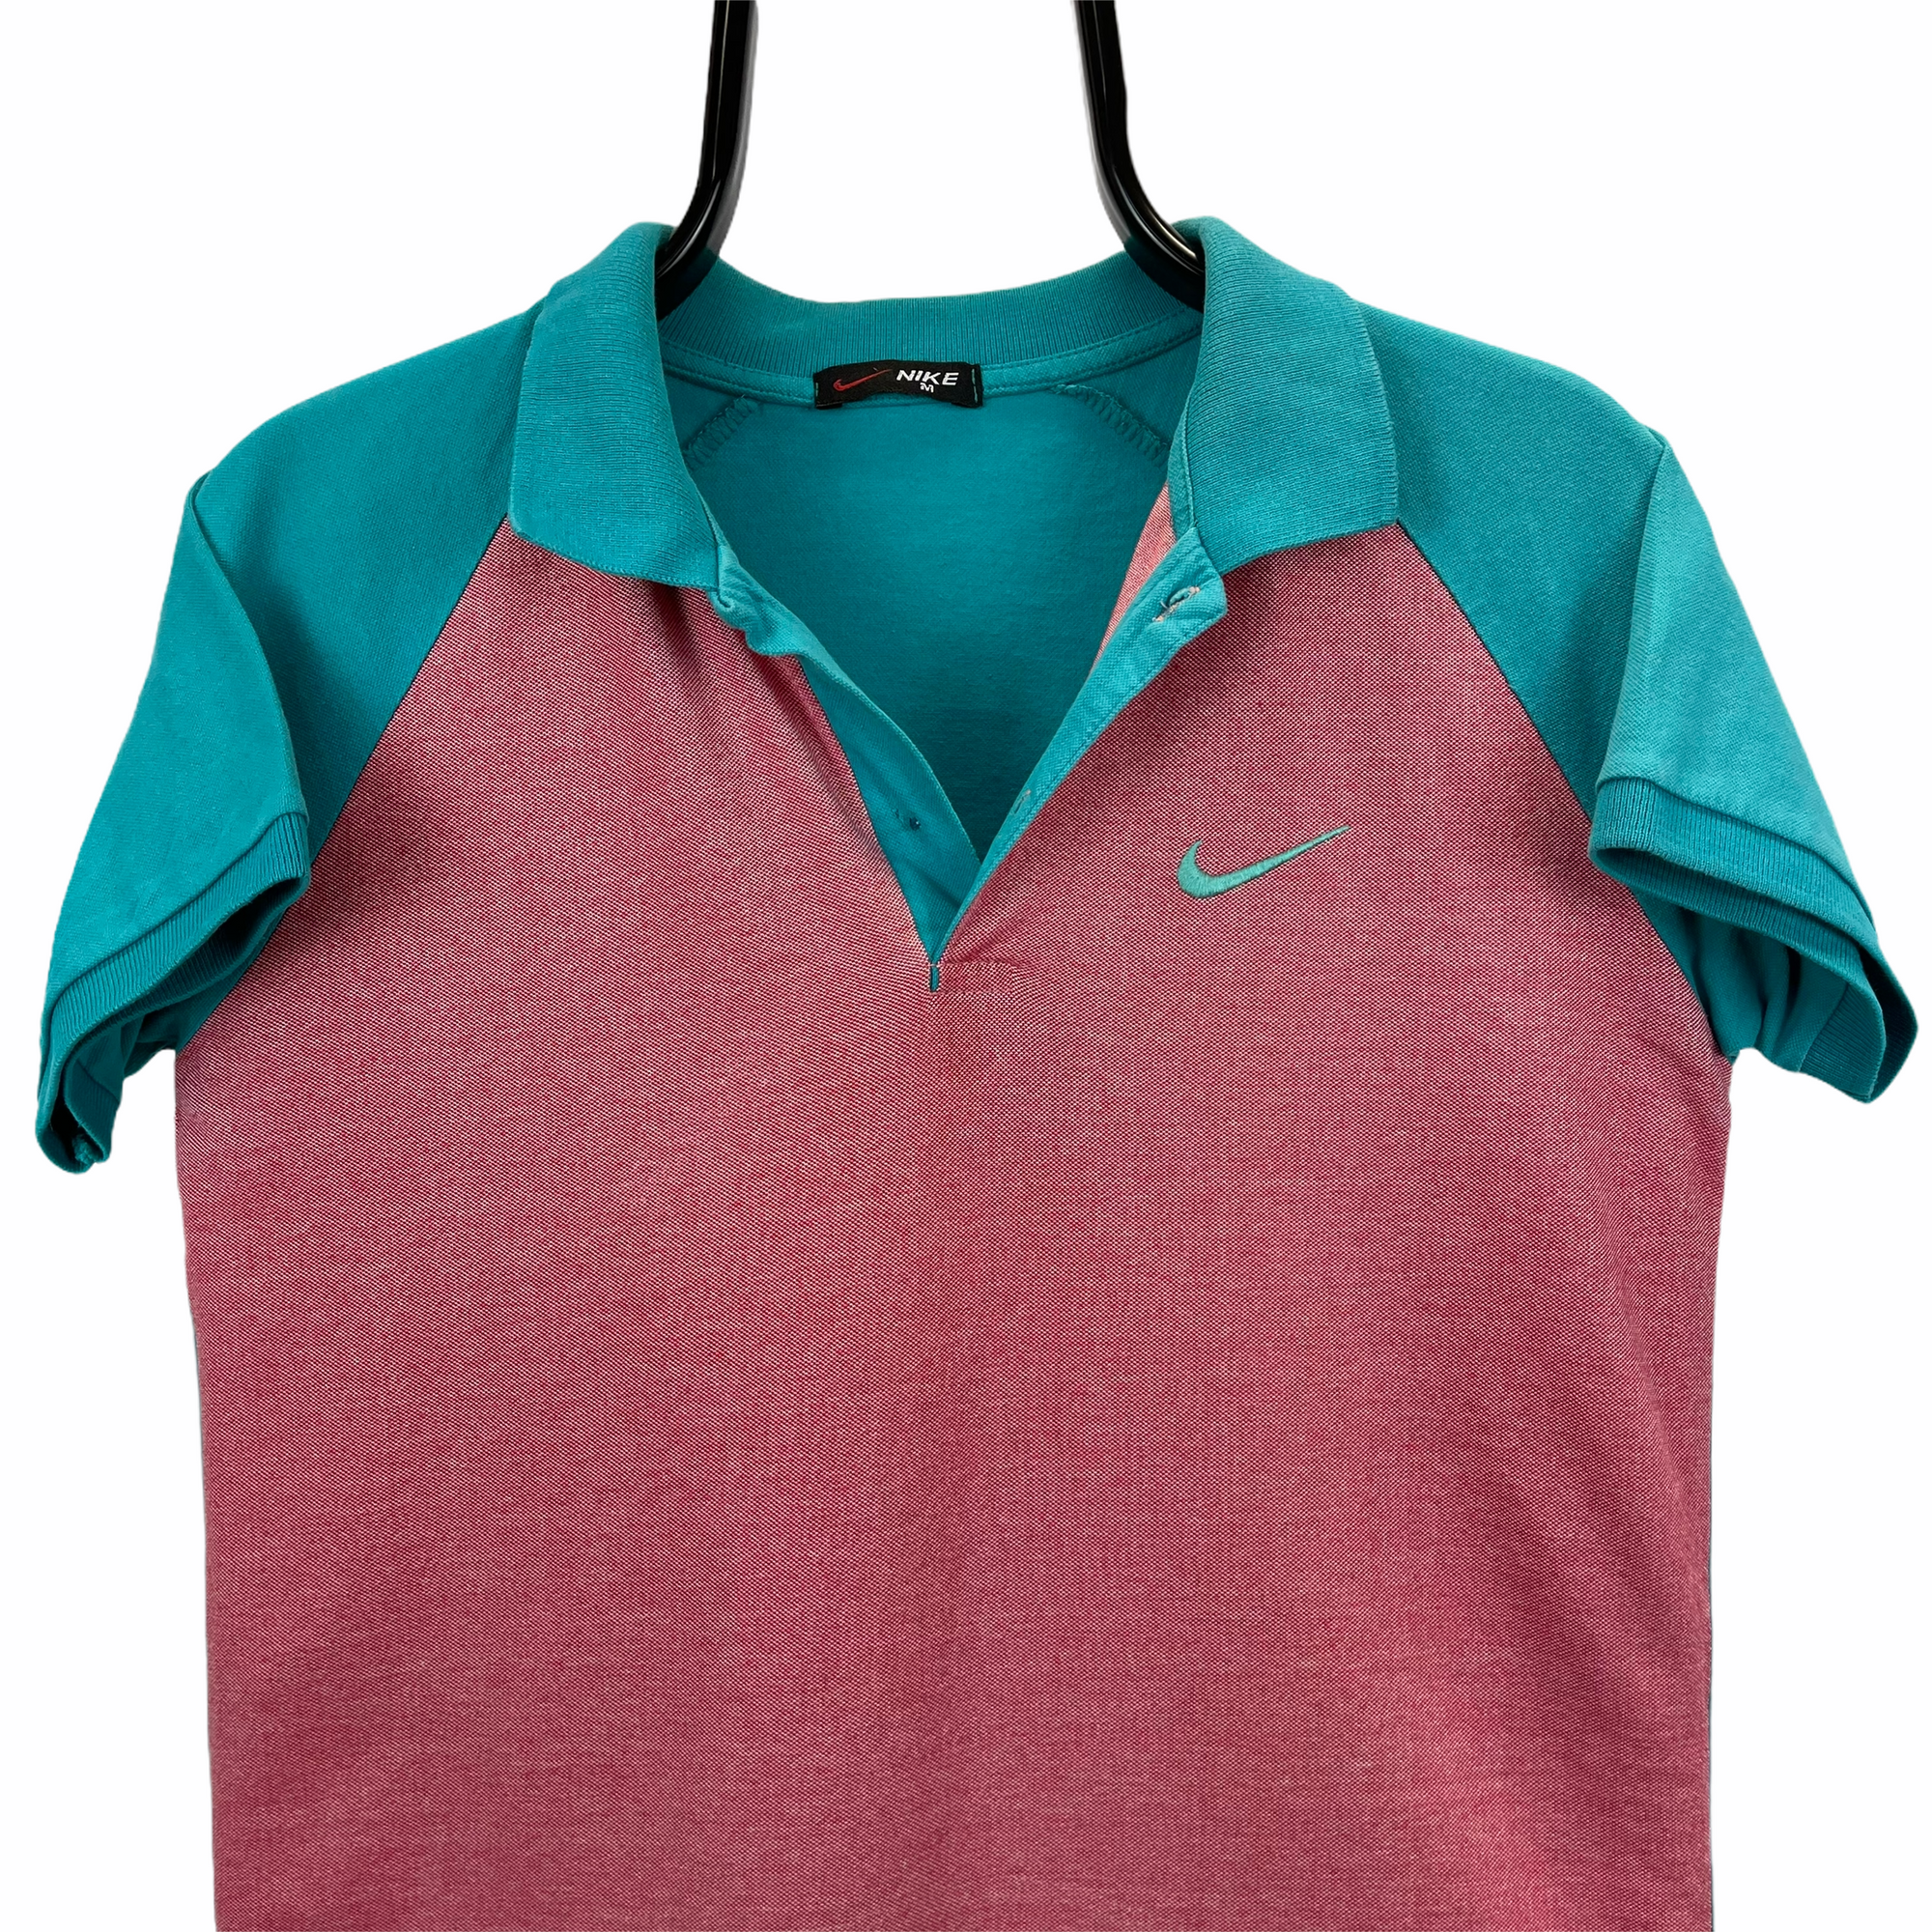 VINTAGE 90S NIKE EMBROIDERED SMALL SWOOSH POLO SHIRT IN RED & TURQUOISE - MEN'S SMALL/WOMEN'S MEDIUM